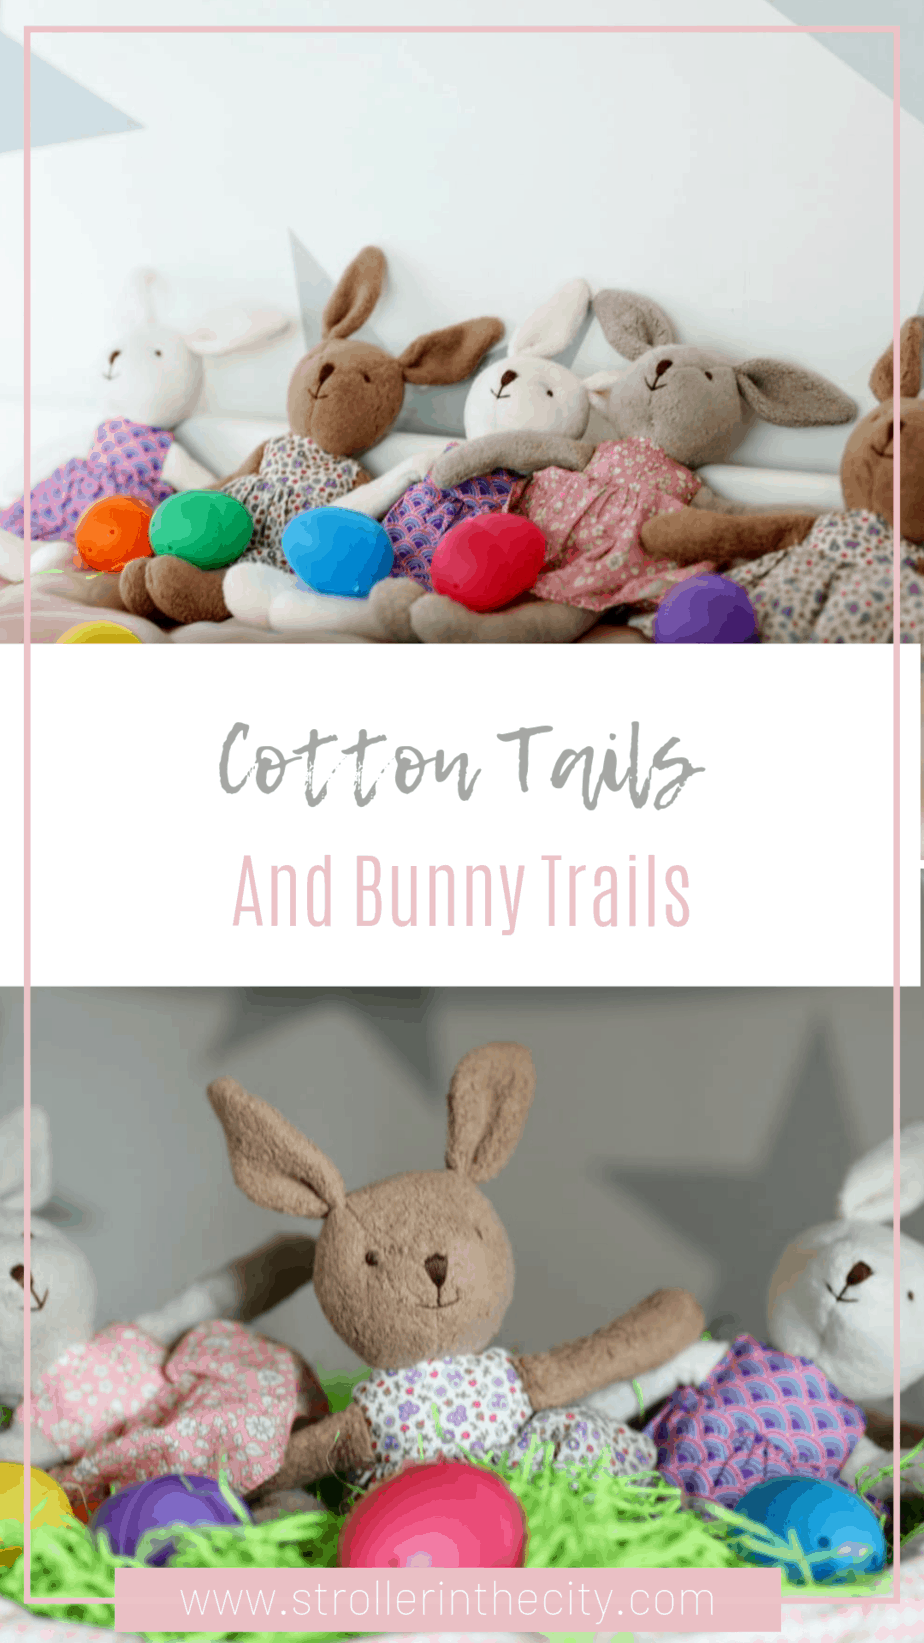 Apple Park Plush Bunnies For Easter | Stroller In The City